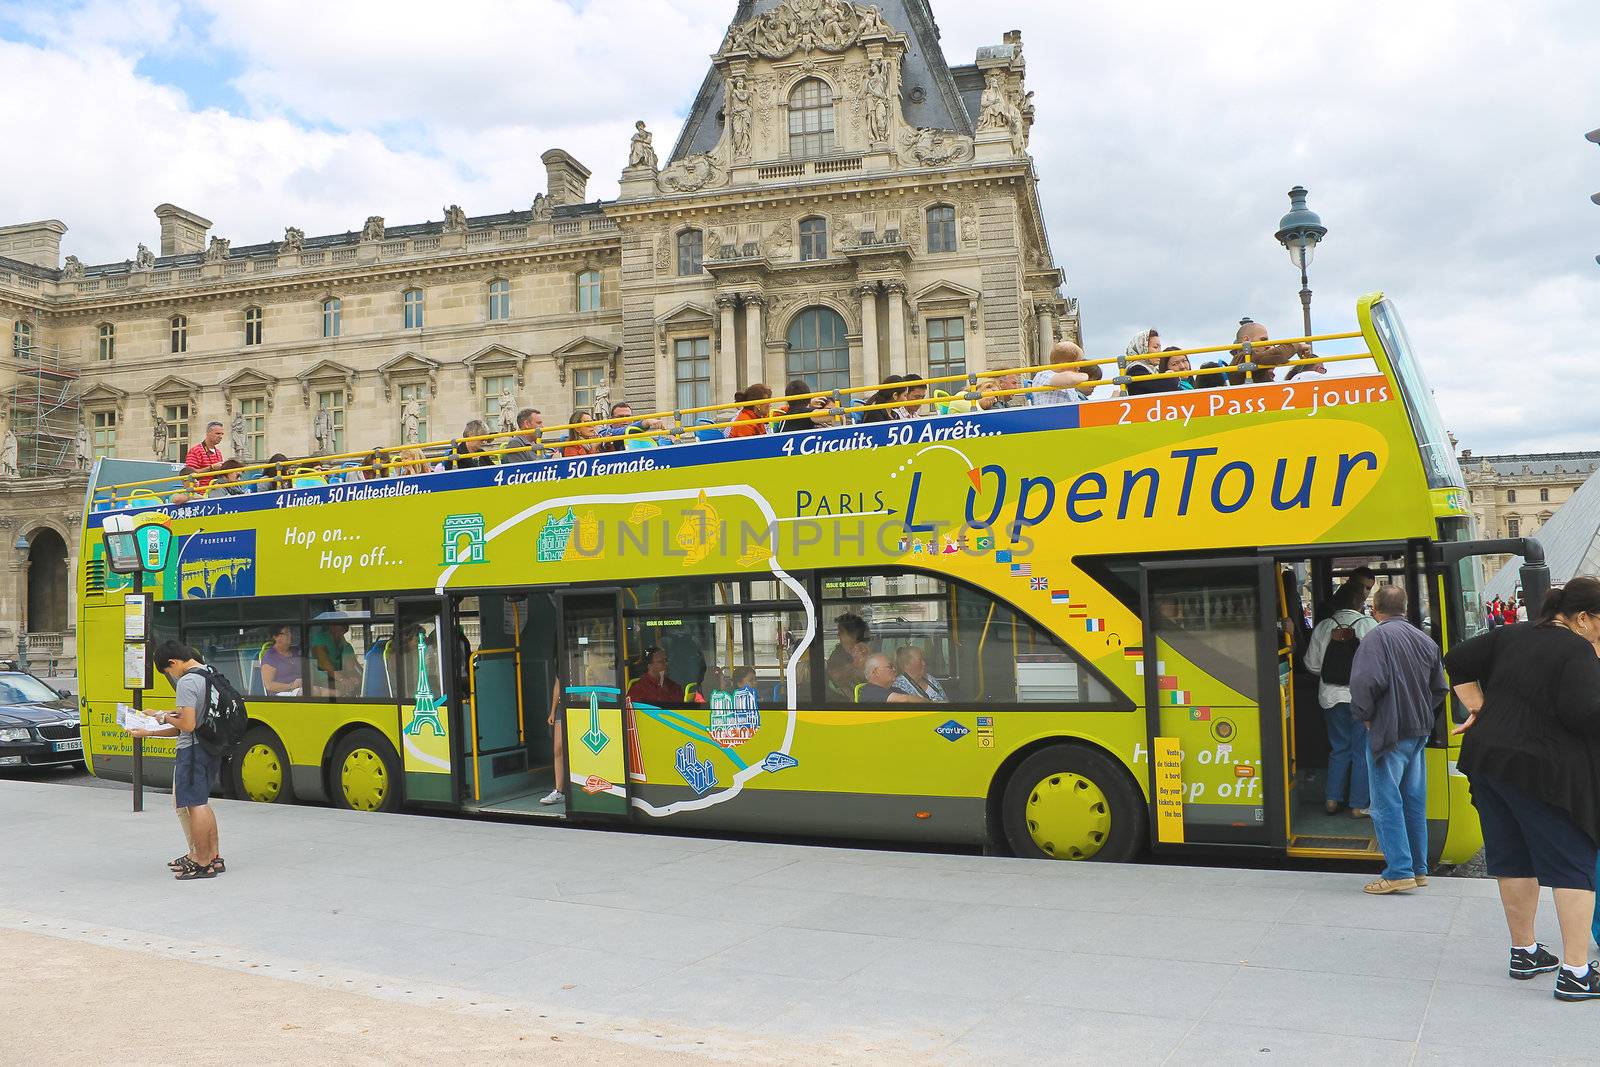 Tourists bus in heart of Paris. France by NickNick